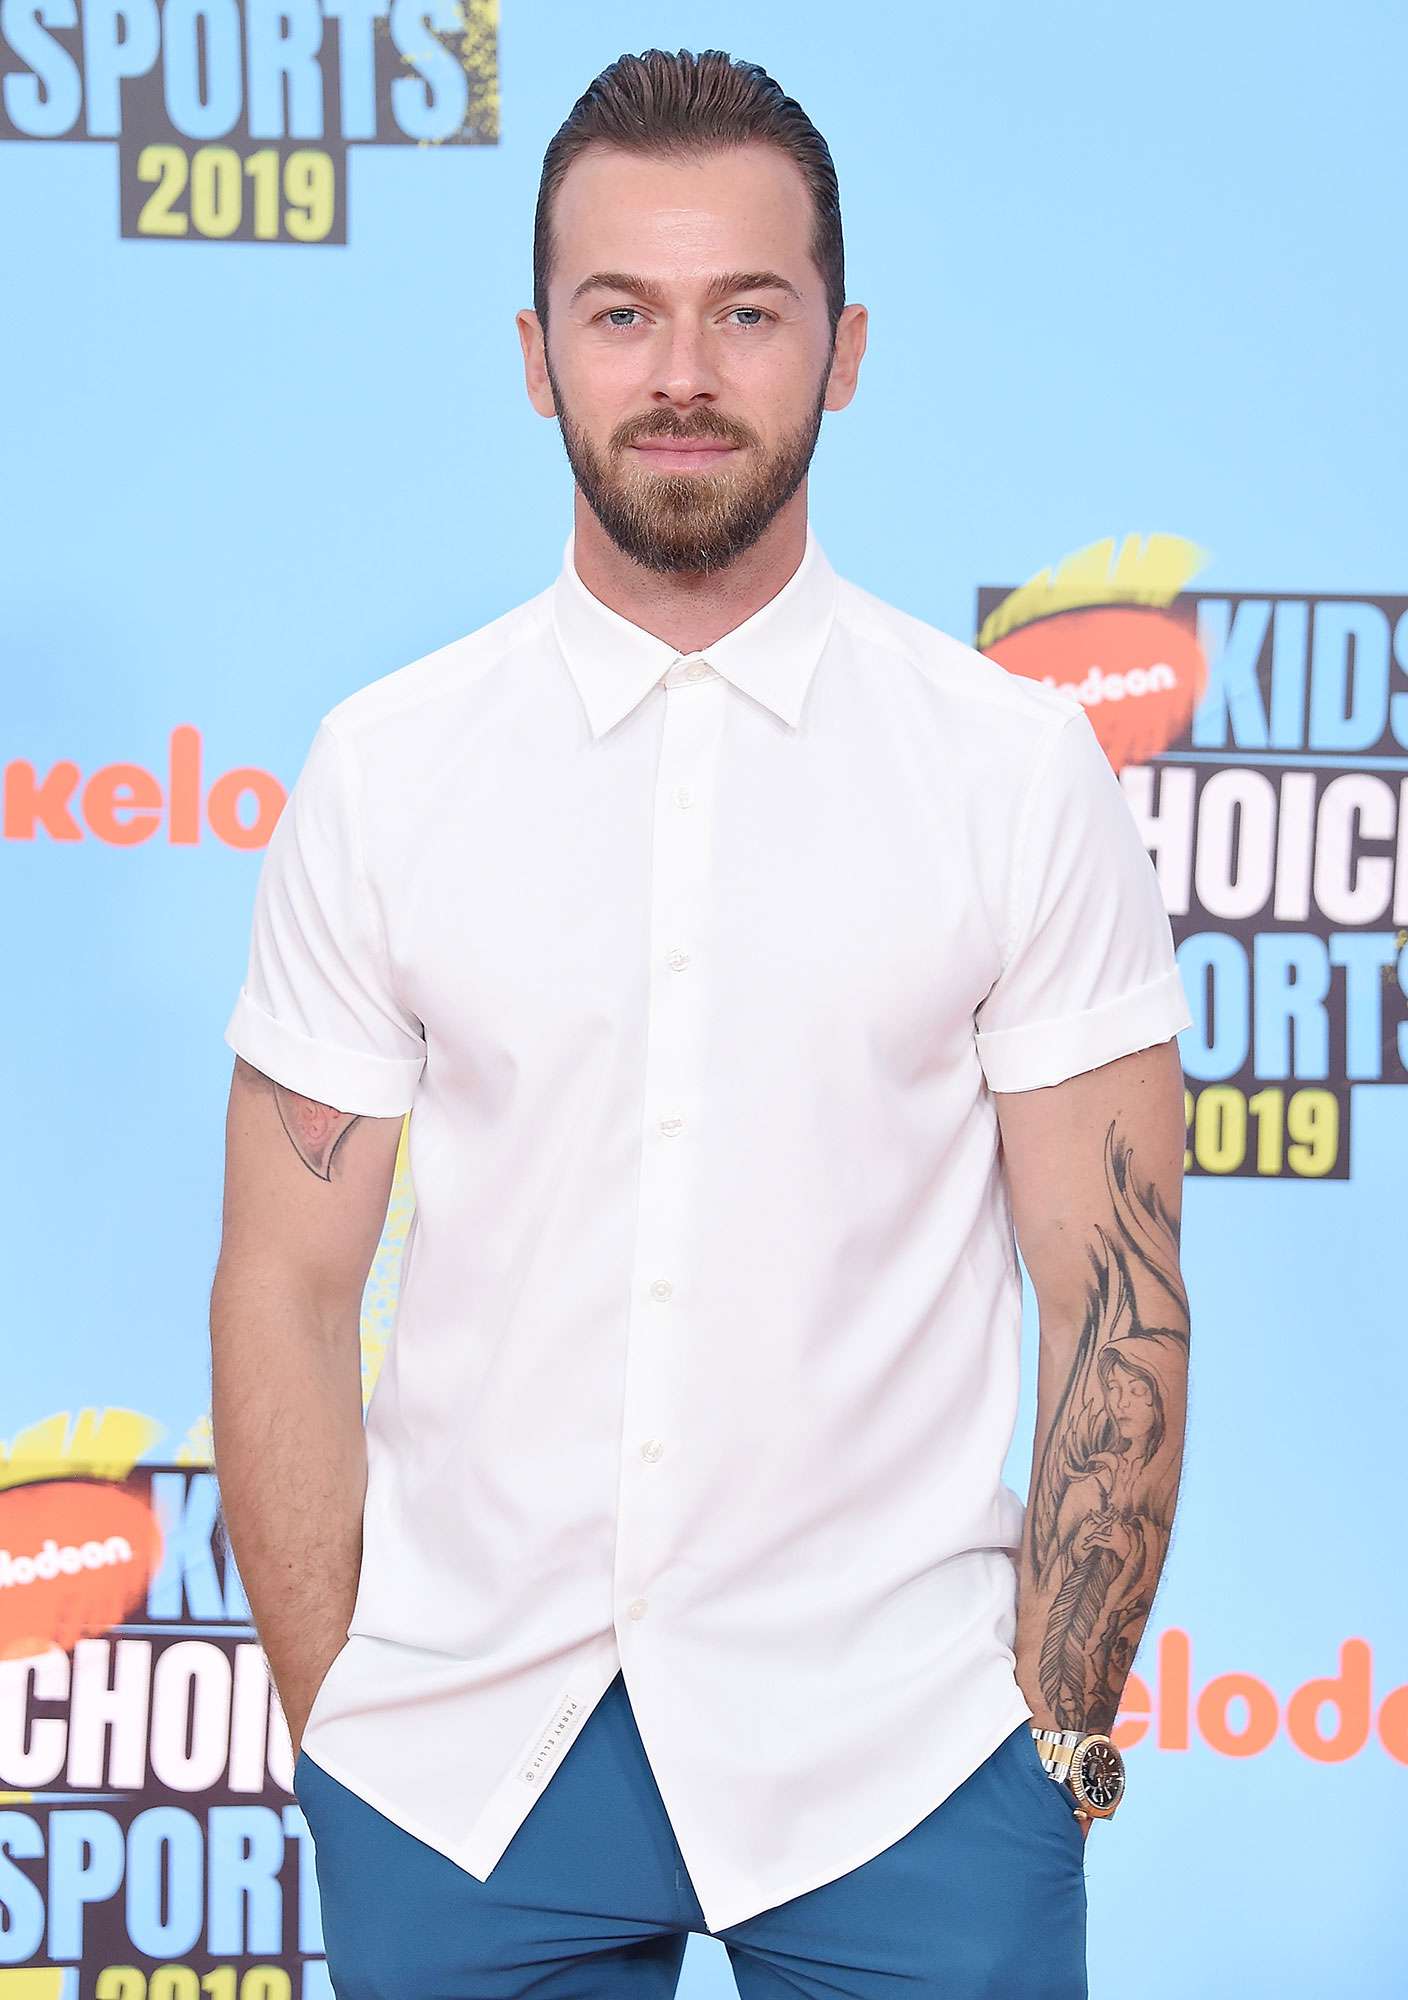 Artem Chigvintsev Stepping Away from DWTS Tour 'Due to Some Unexpected Health Issues' 